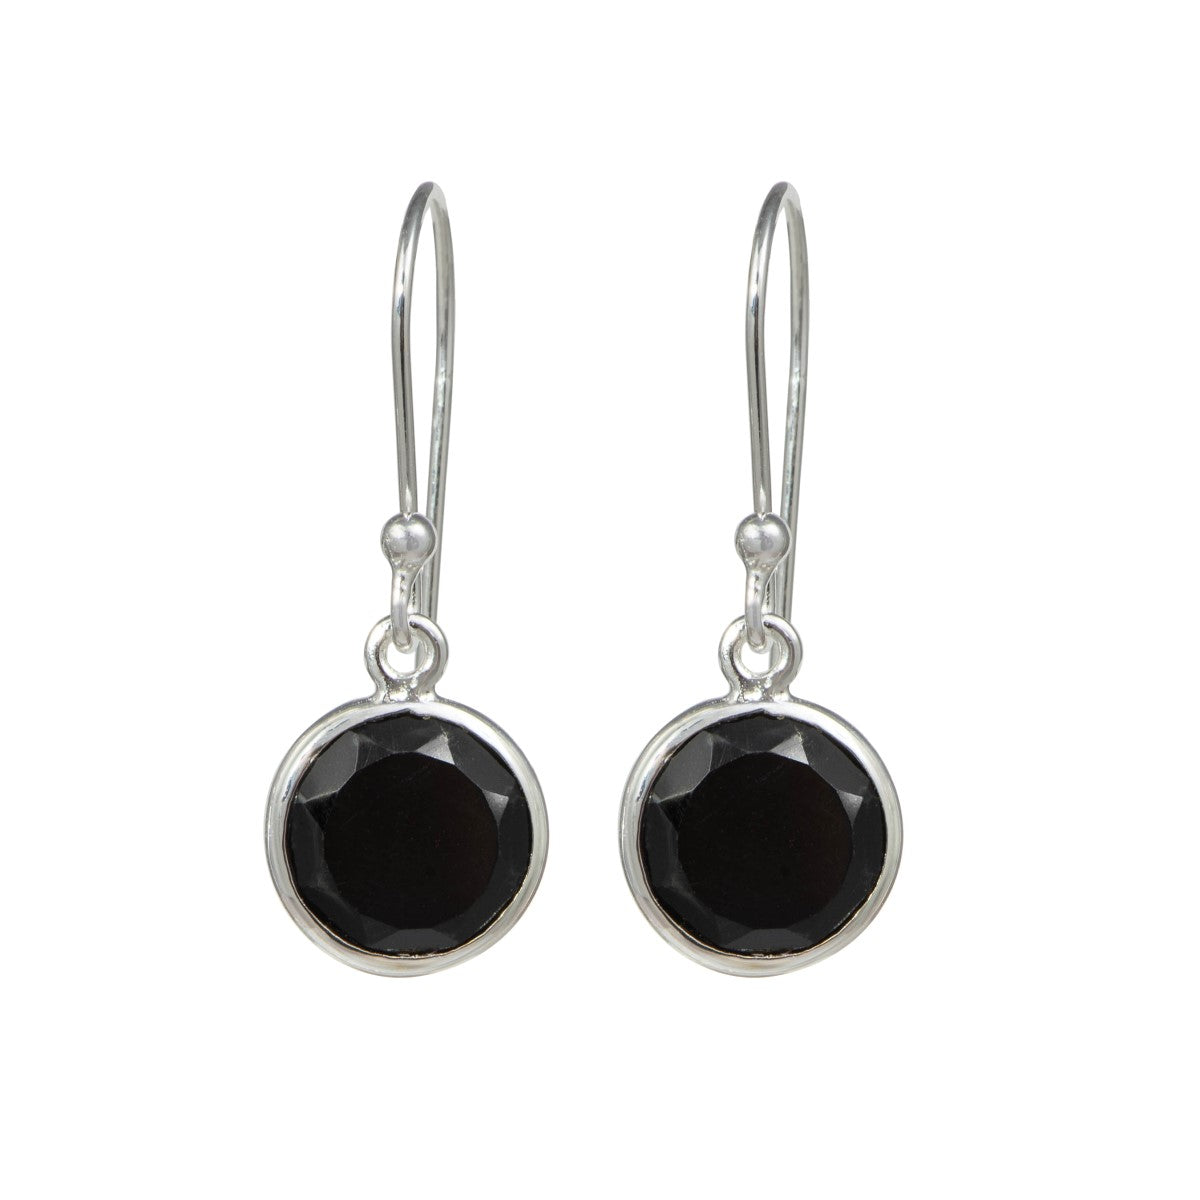 Black Onyx Sterling Silver Earrings with a Round Faceted Gemstone Drop